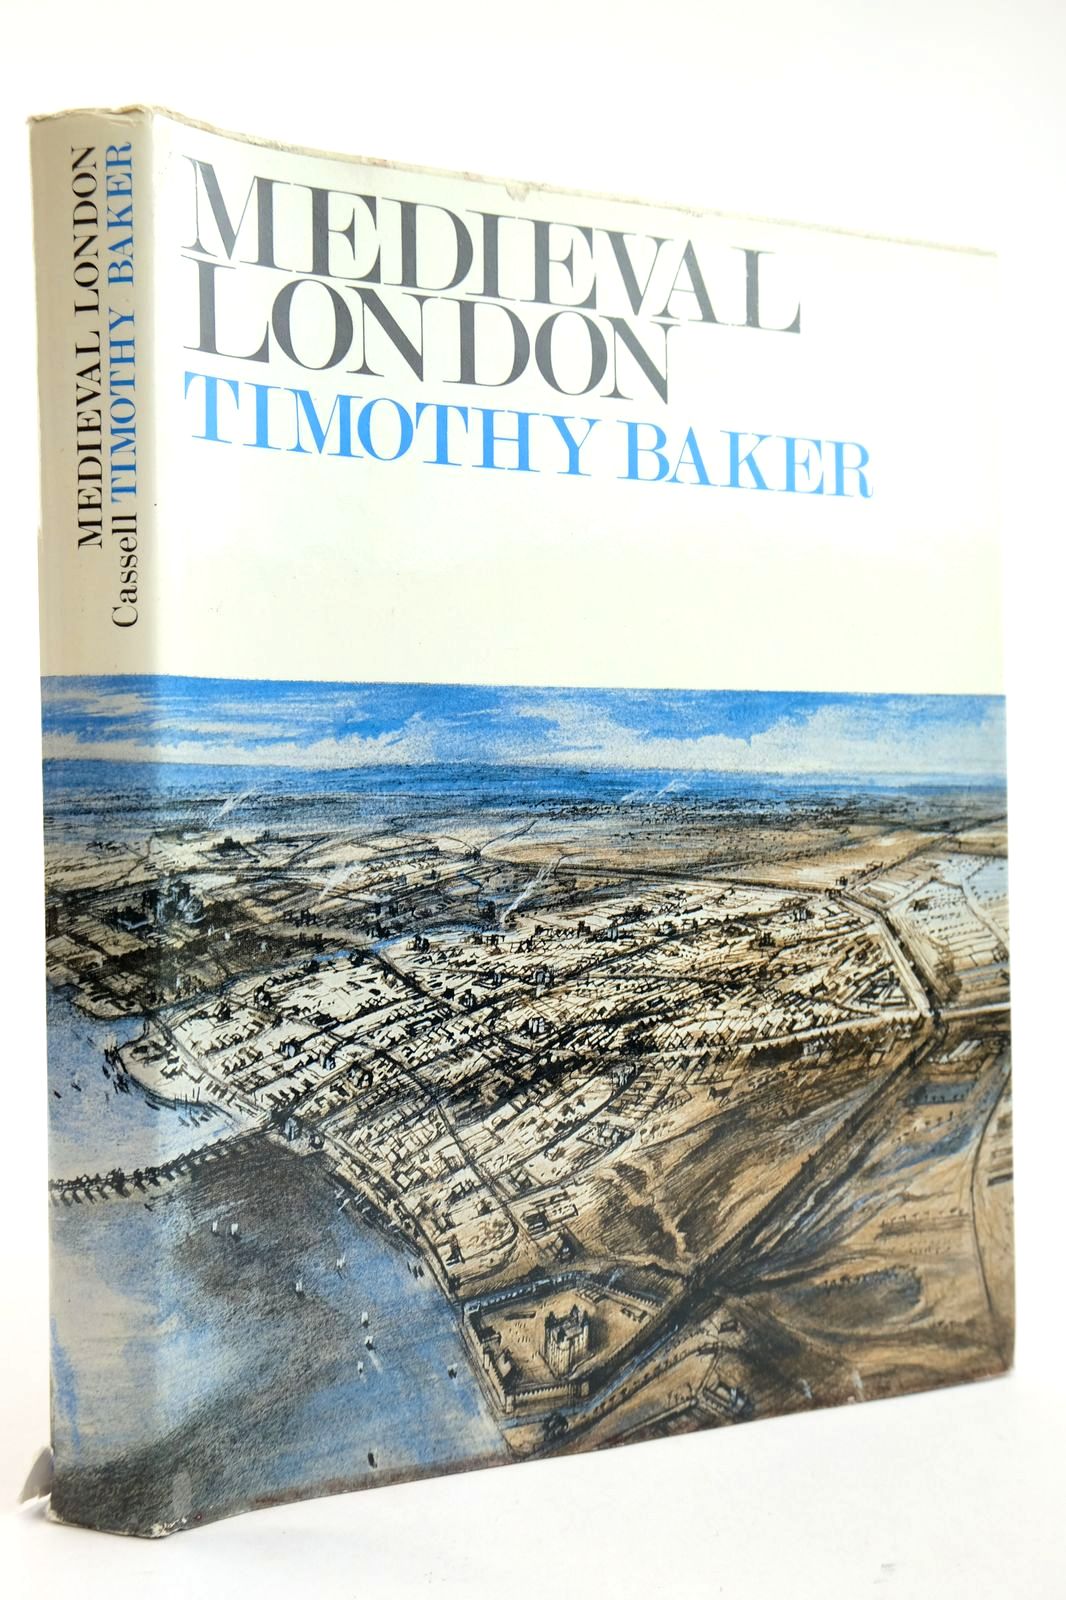 Photo of MEDIEVAL LONDON written by Baker, Timothy published by Cassell & Company Limited (STOCK CODE: 2132597)  for sale by Stella & Rose's Books